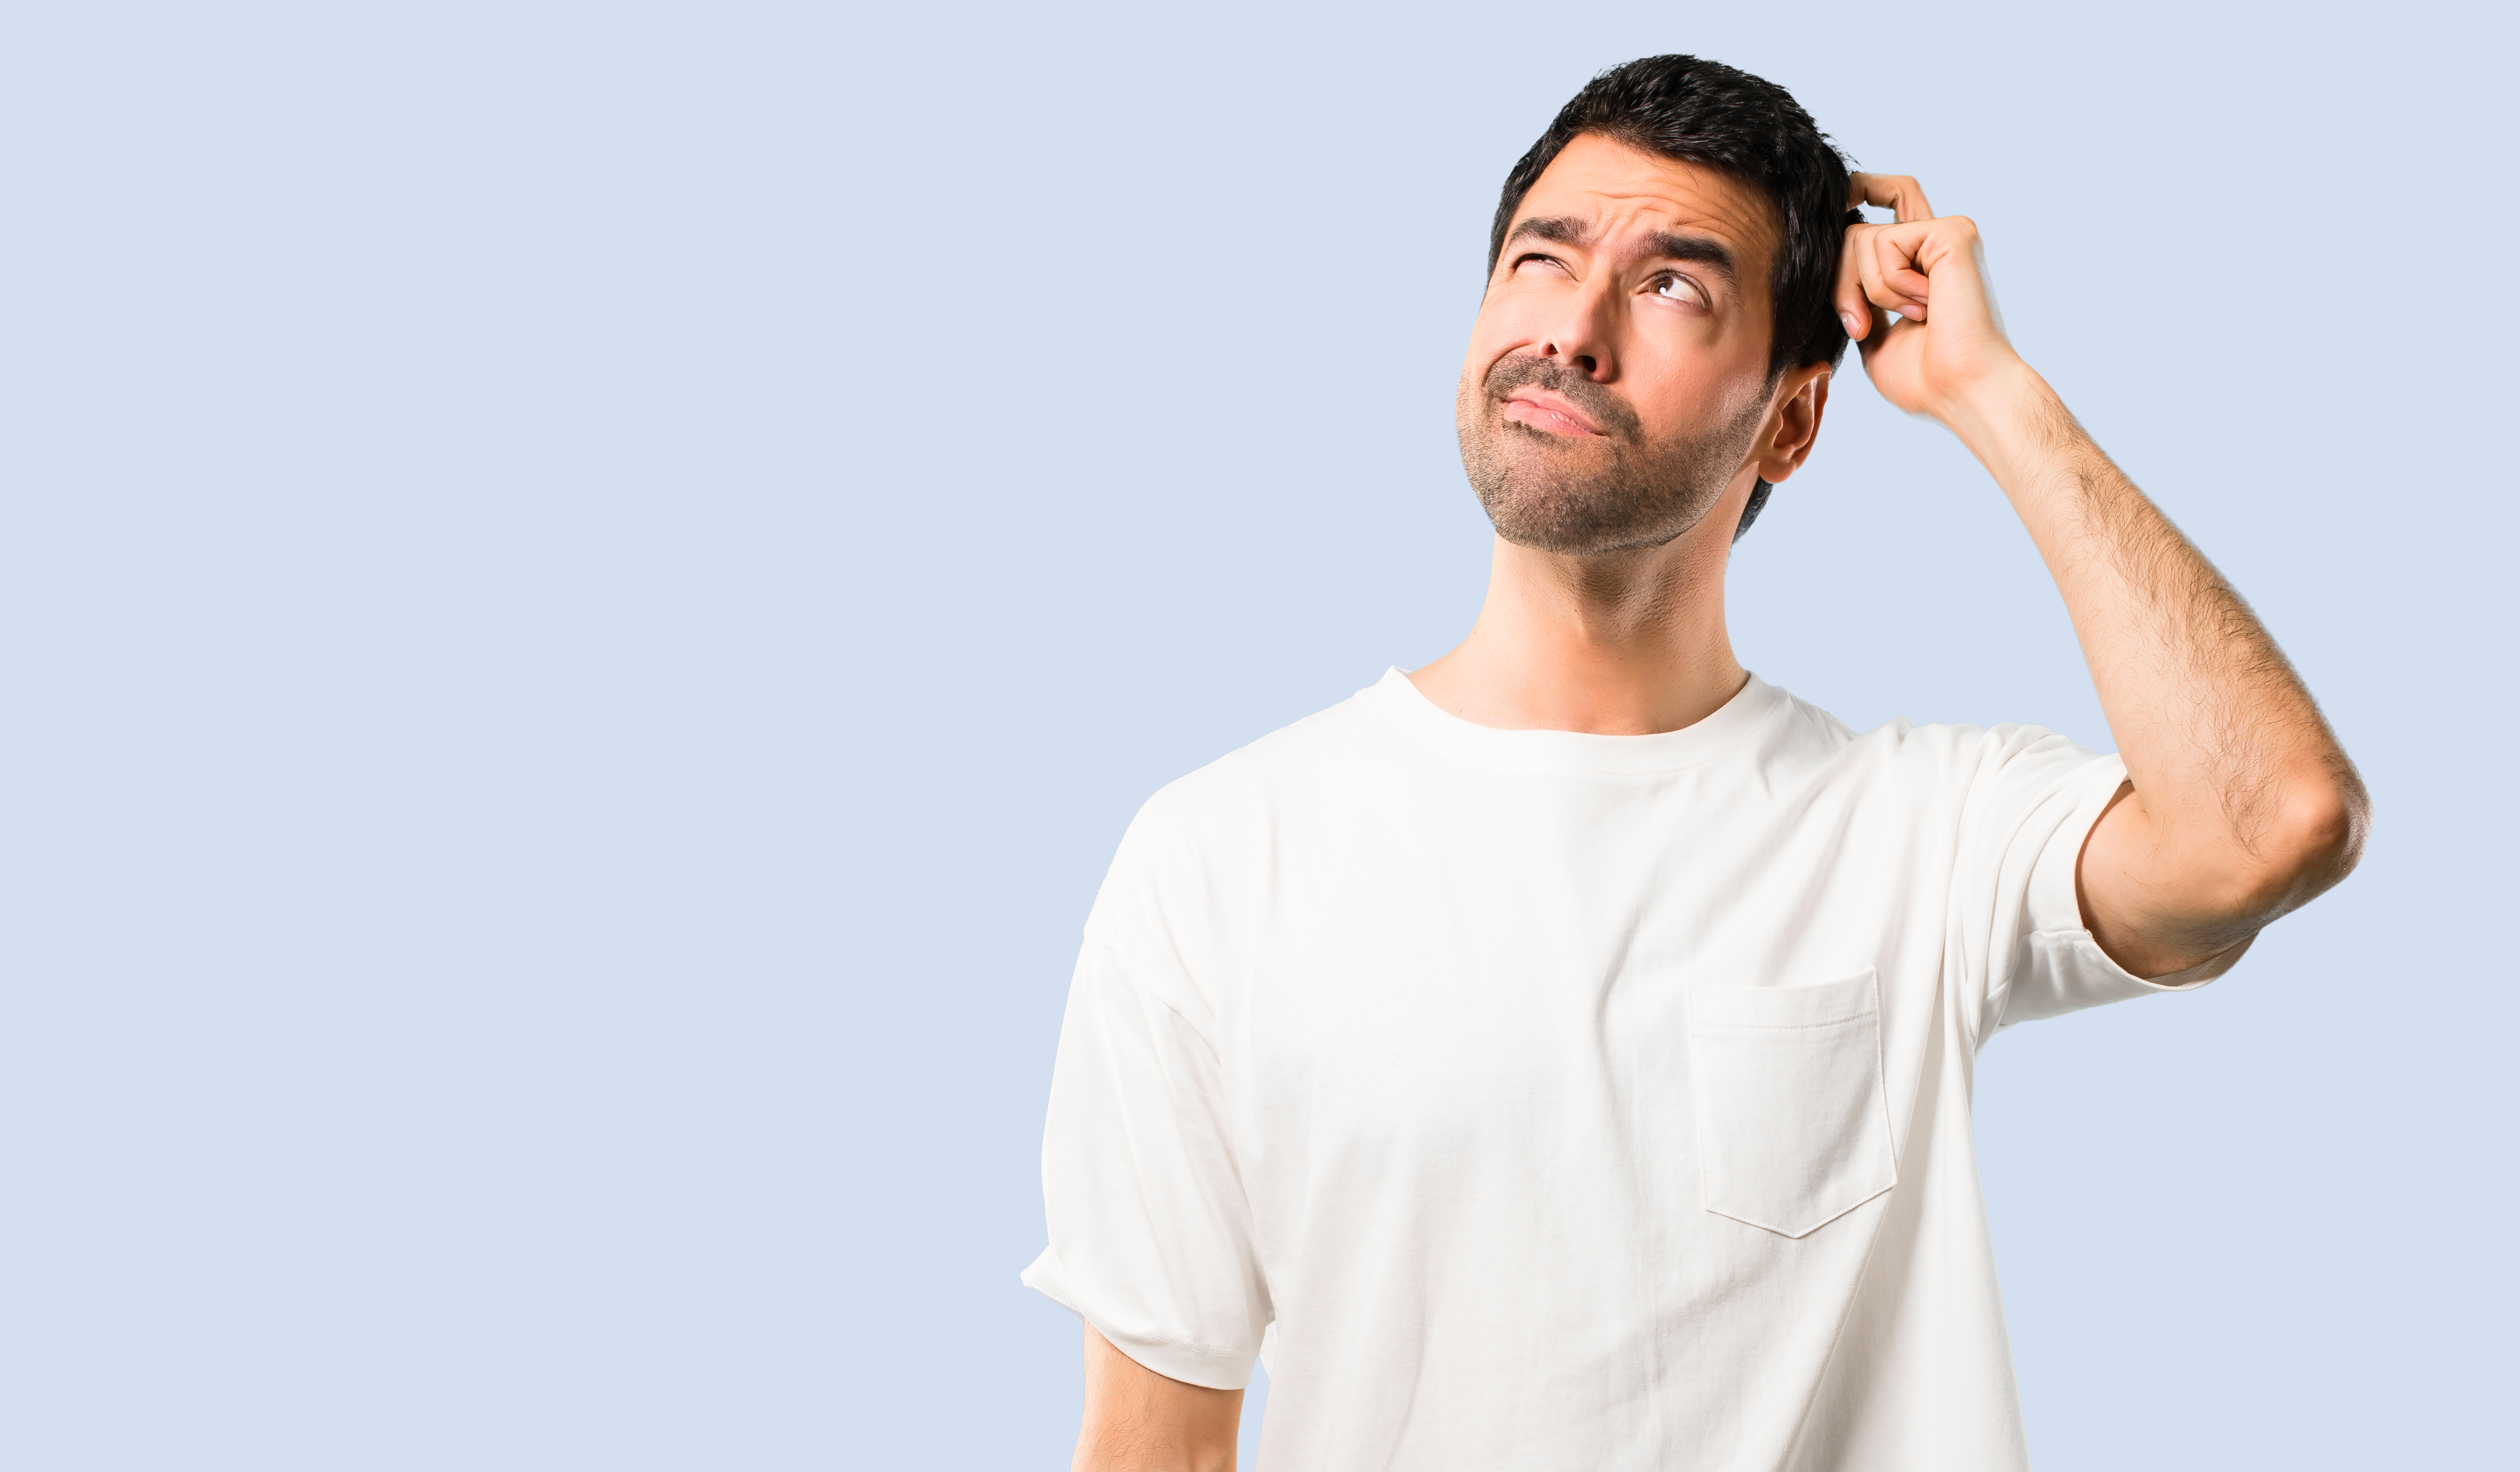 A man in a white shirt scratching his head | Source: Shutterstock